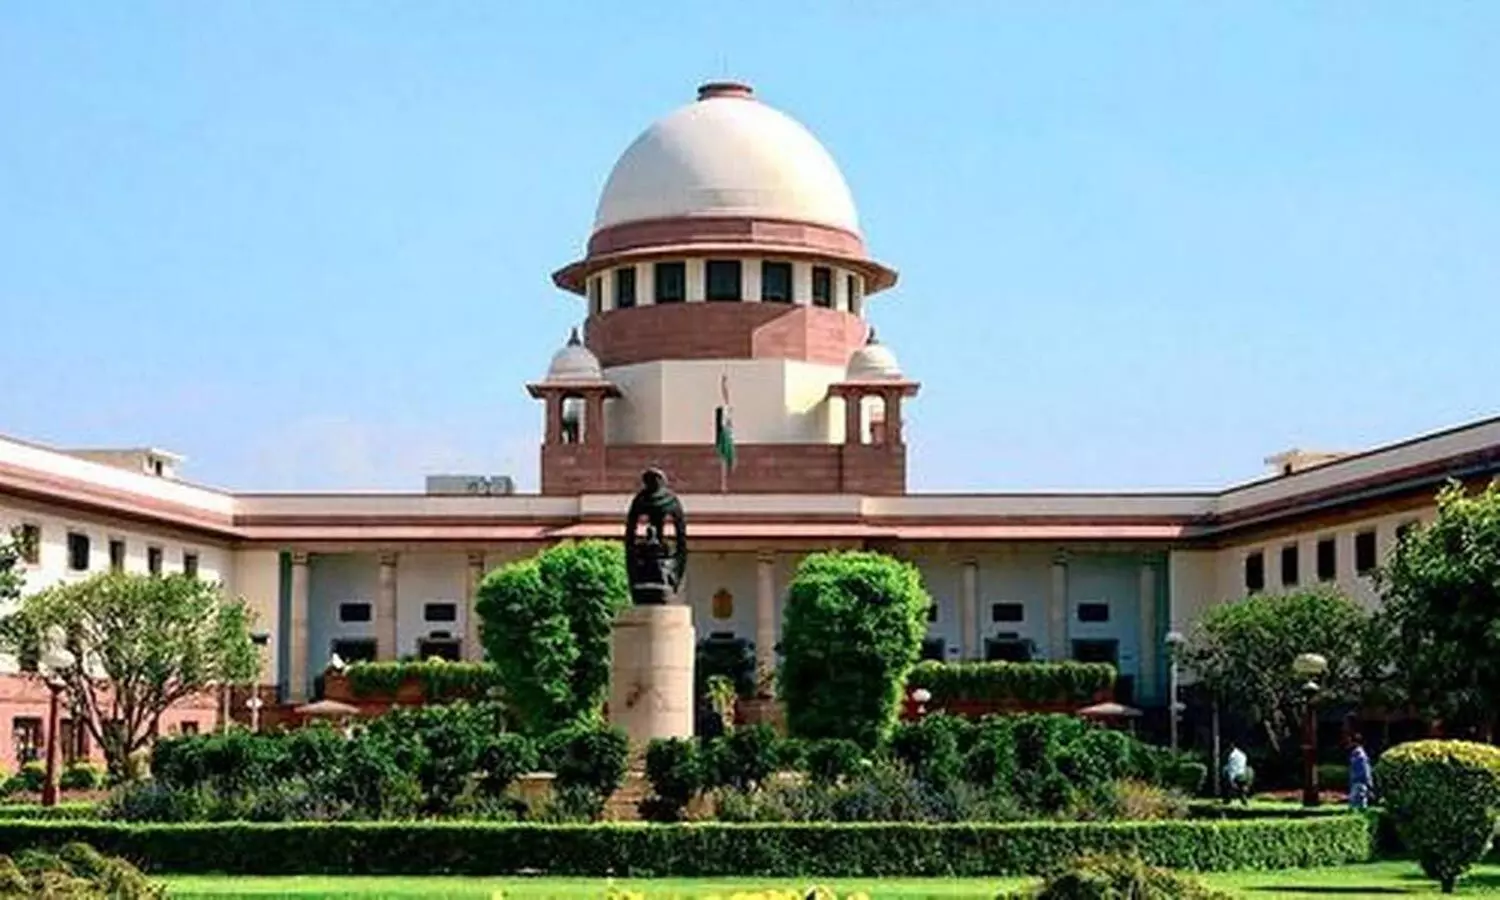 Dont Misuse Courts Role: SC junks plea seeking further reduction in NEET PG cut-off percentile